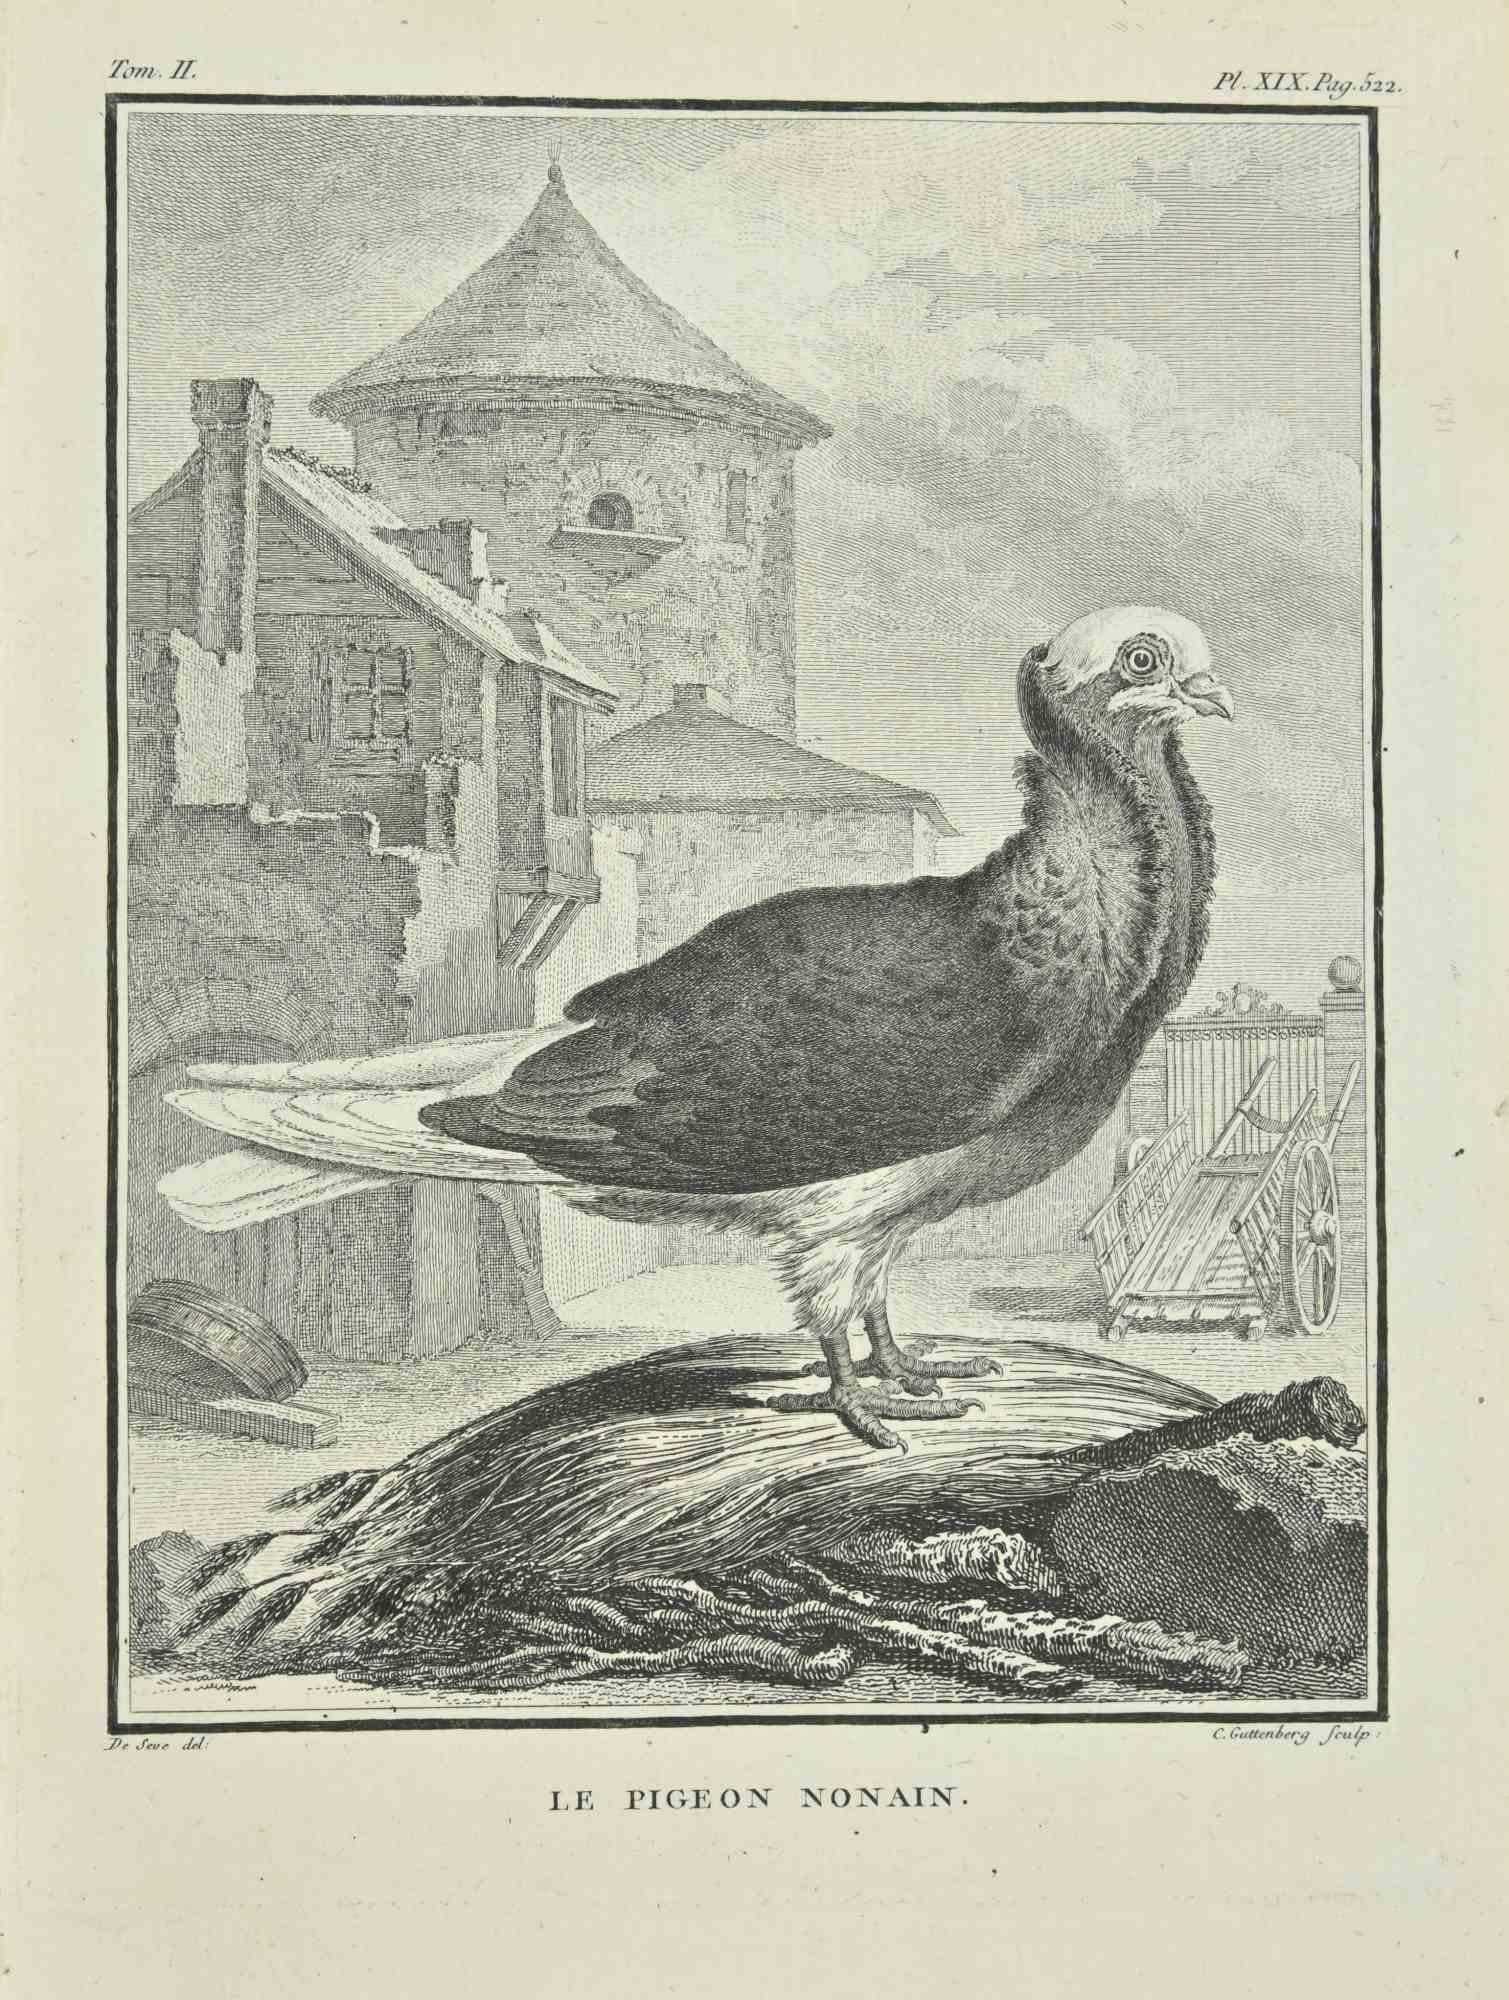 Le Pigeon Nonain - Etching by Carl Guttenber - 1771